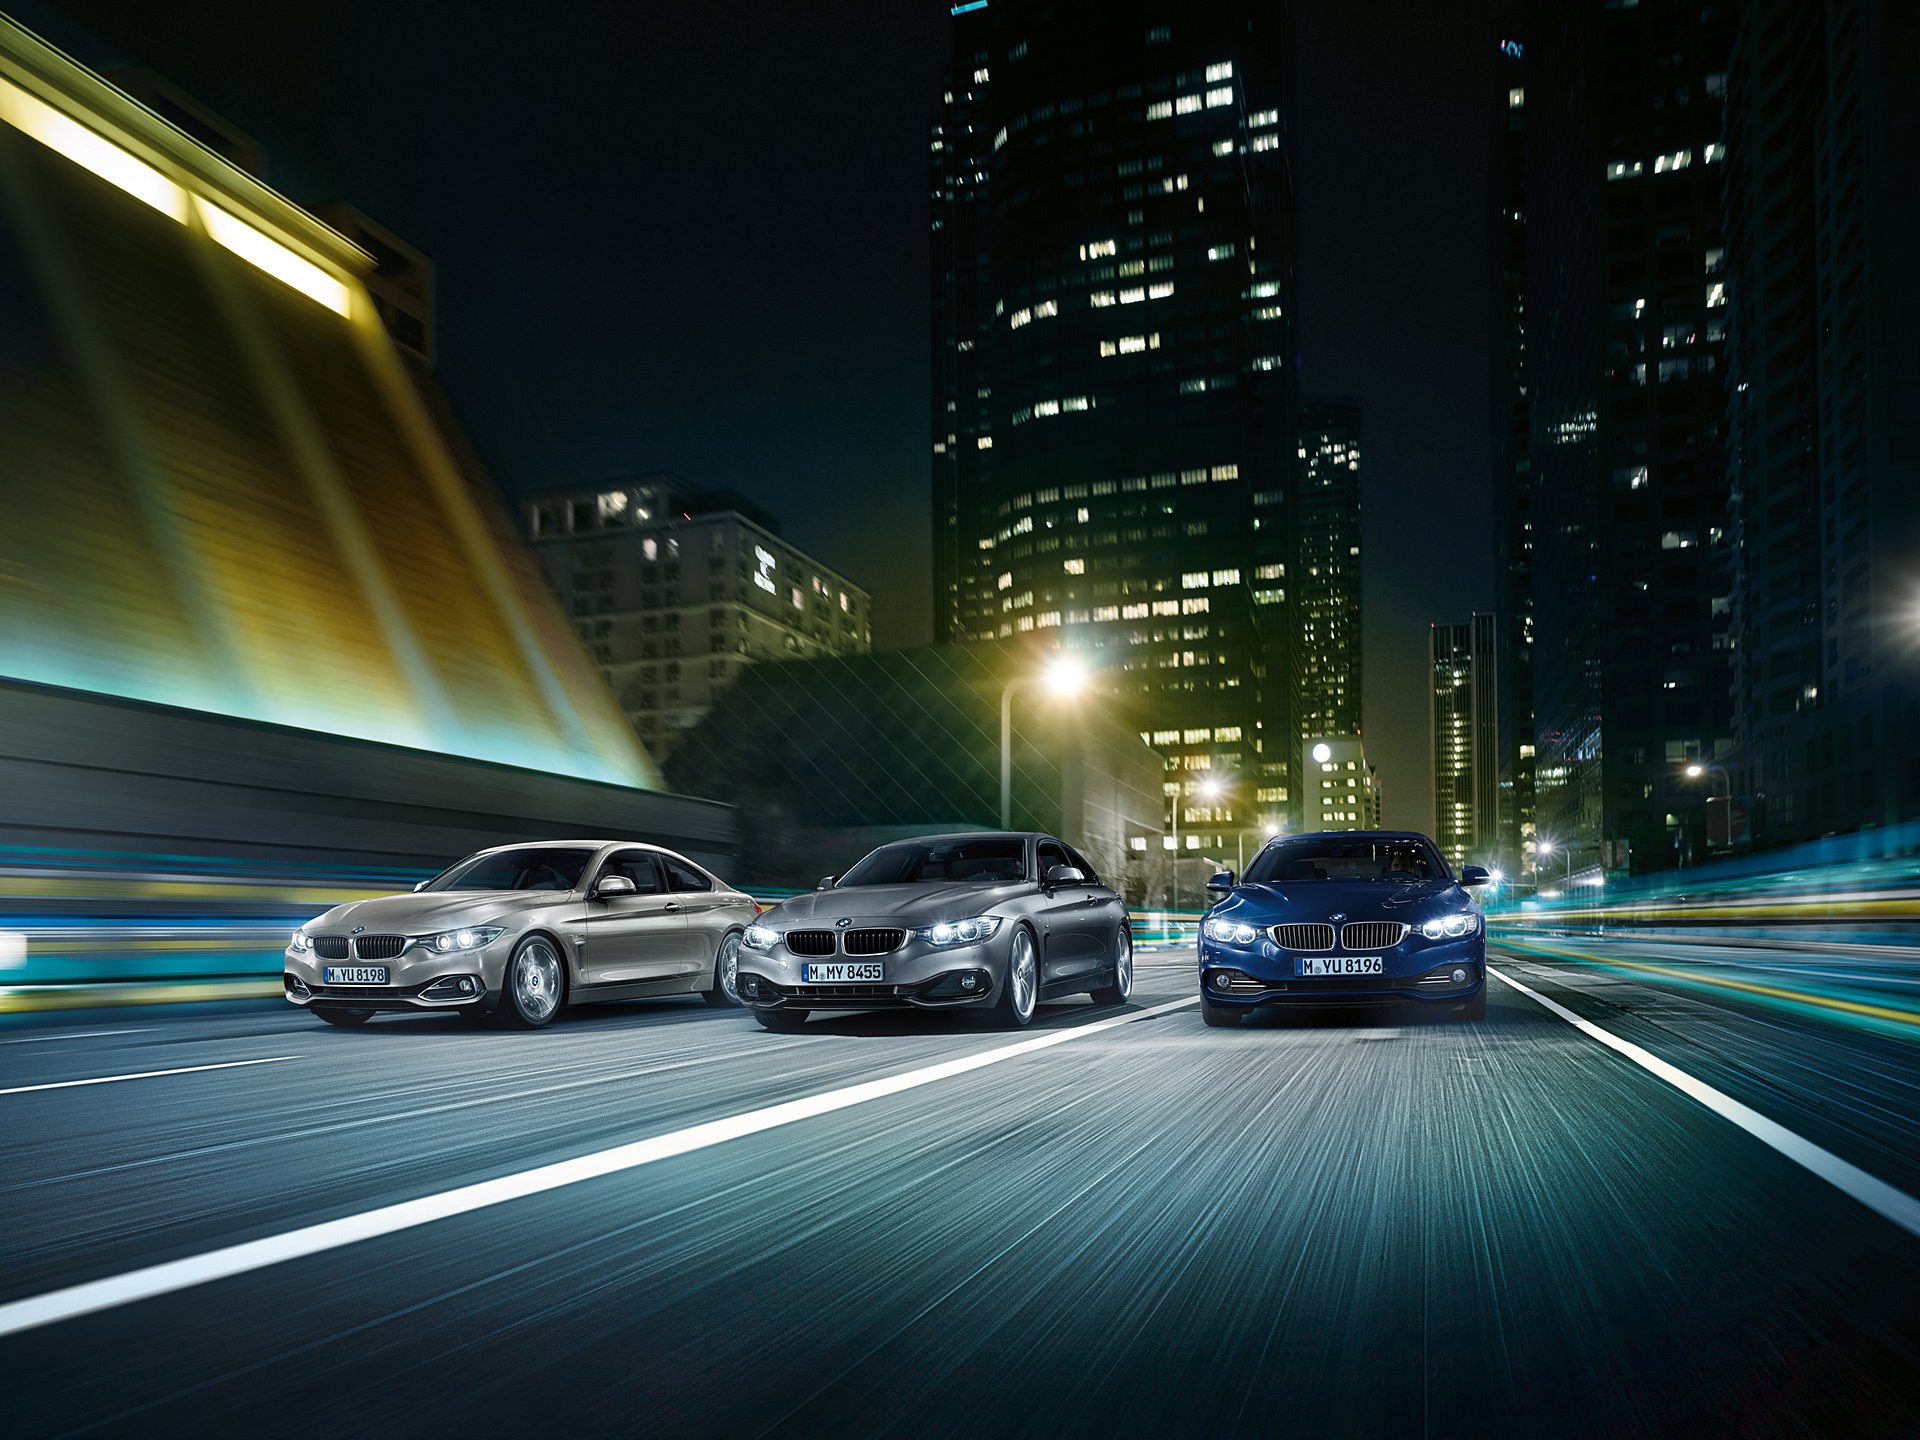  2014 BMW 4-Series Coupe Wallpaper.